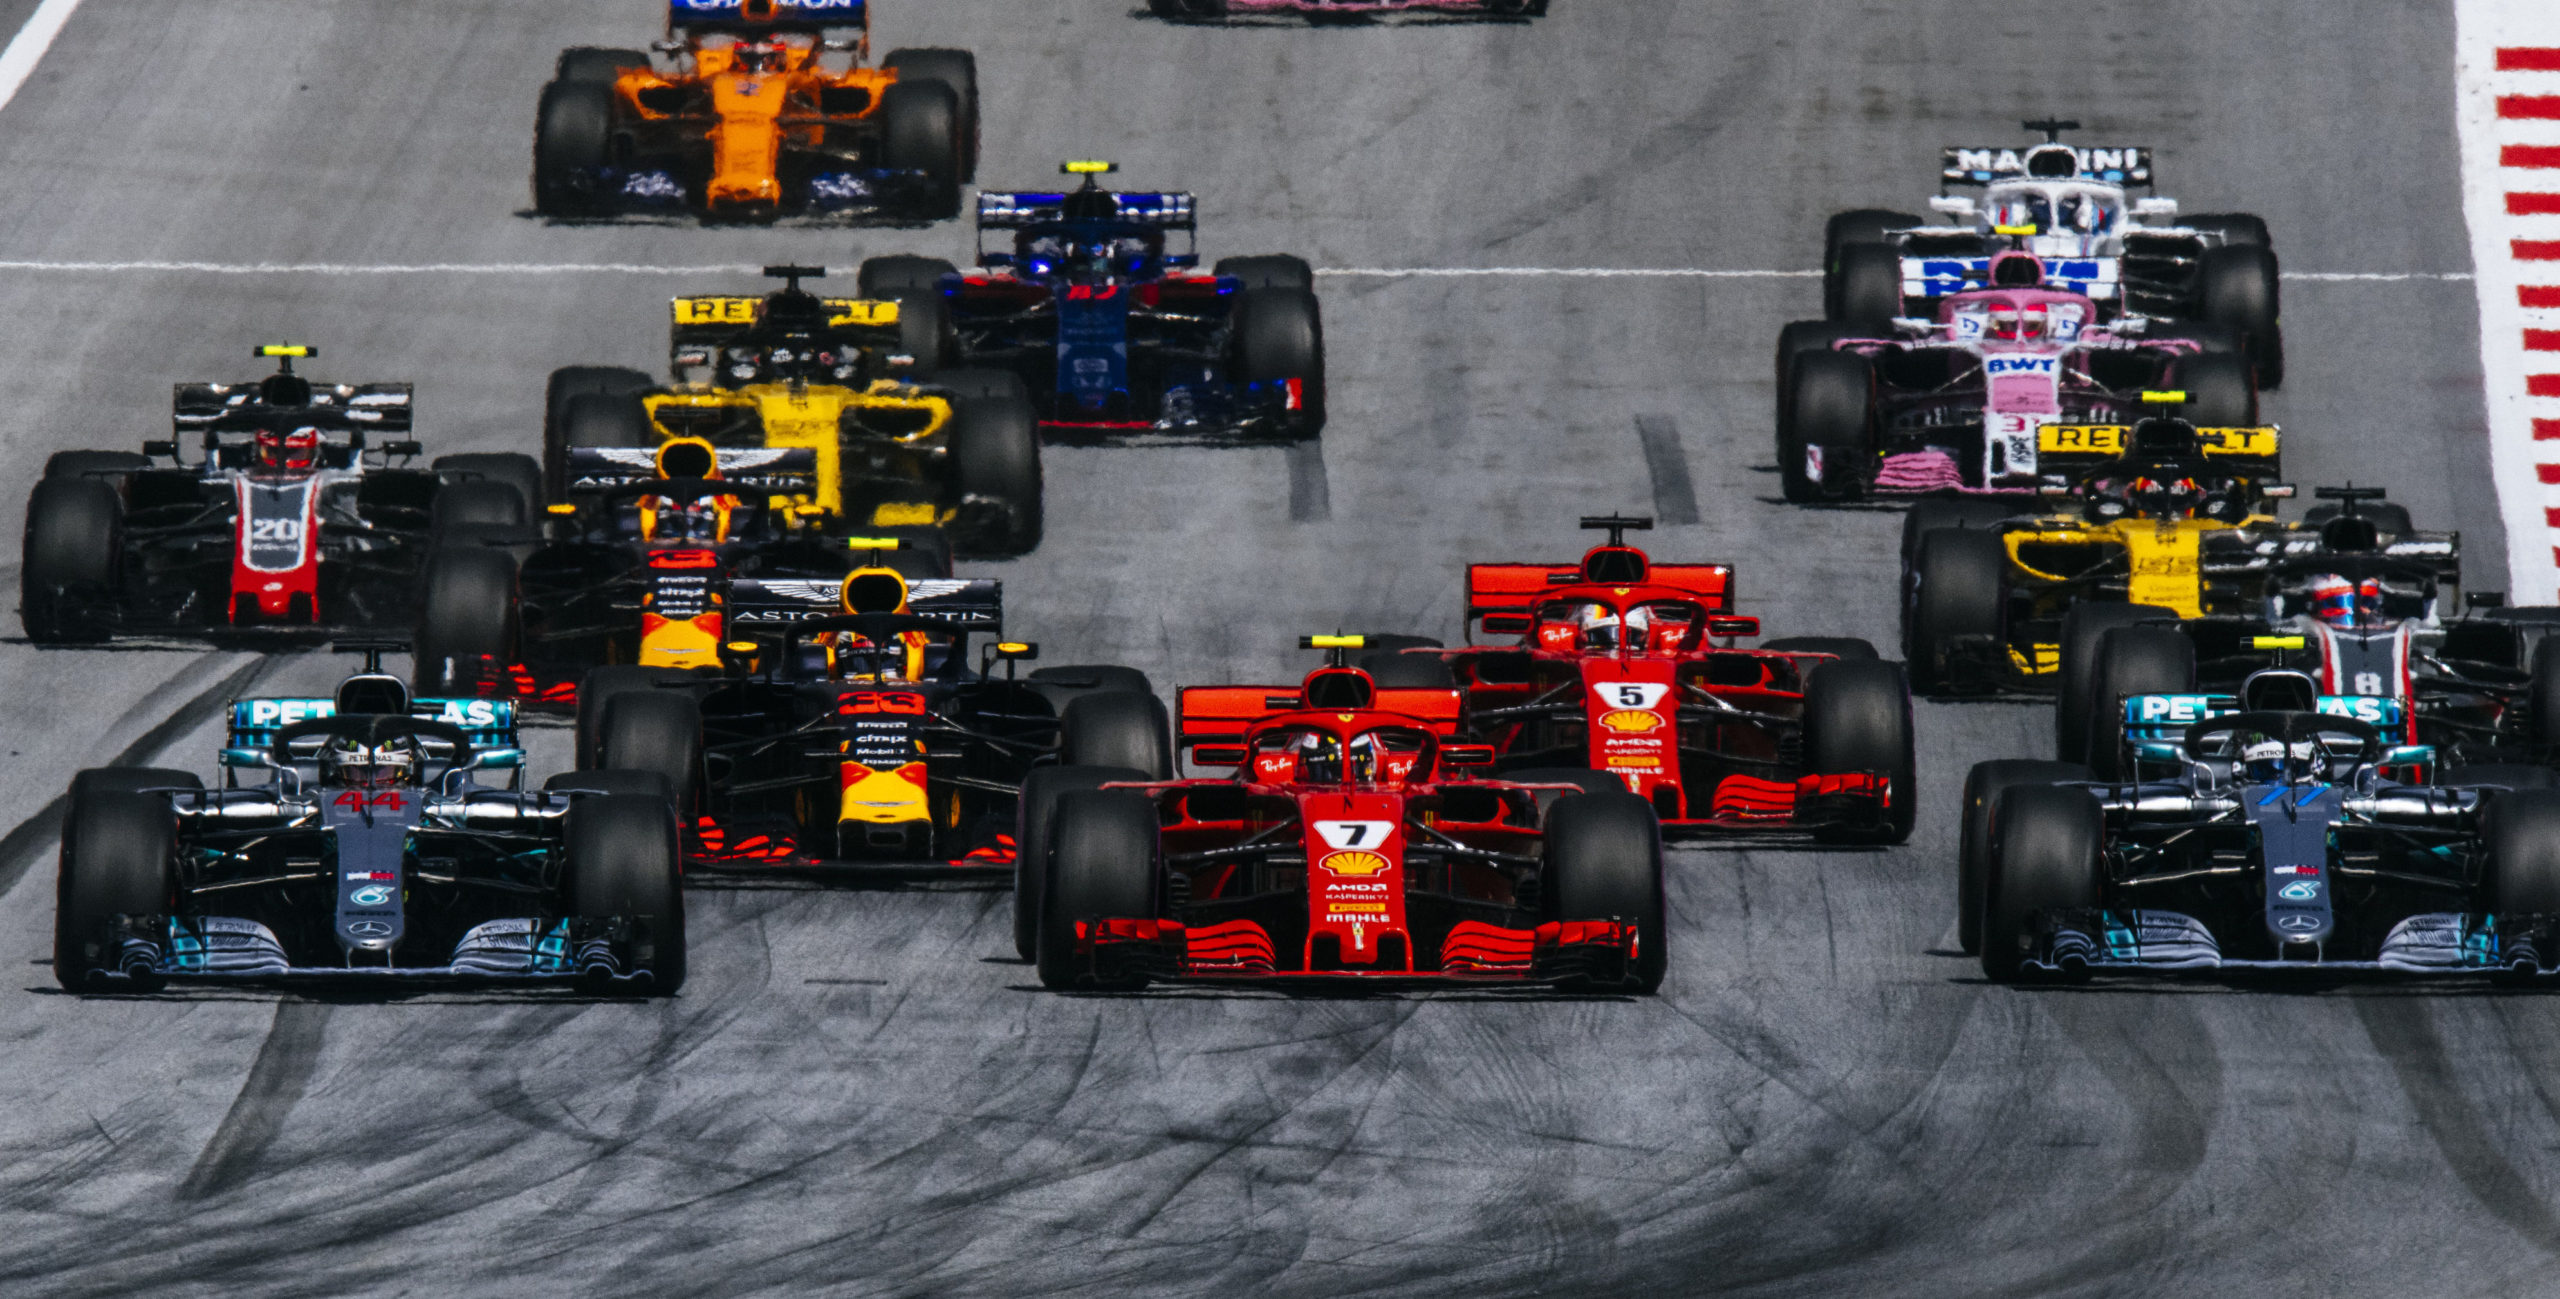 F1 Will Be Launching Its Streaming Service On Amazon Prime